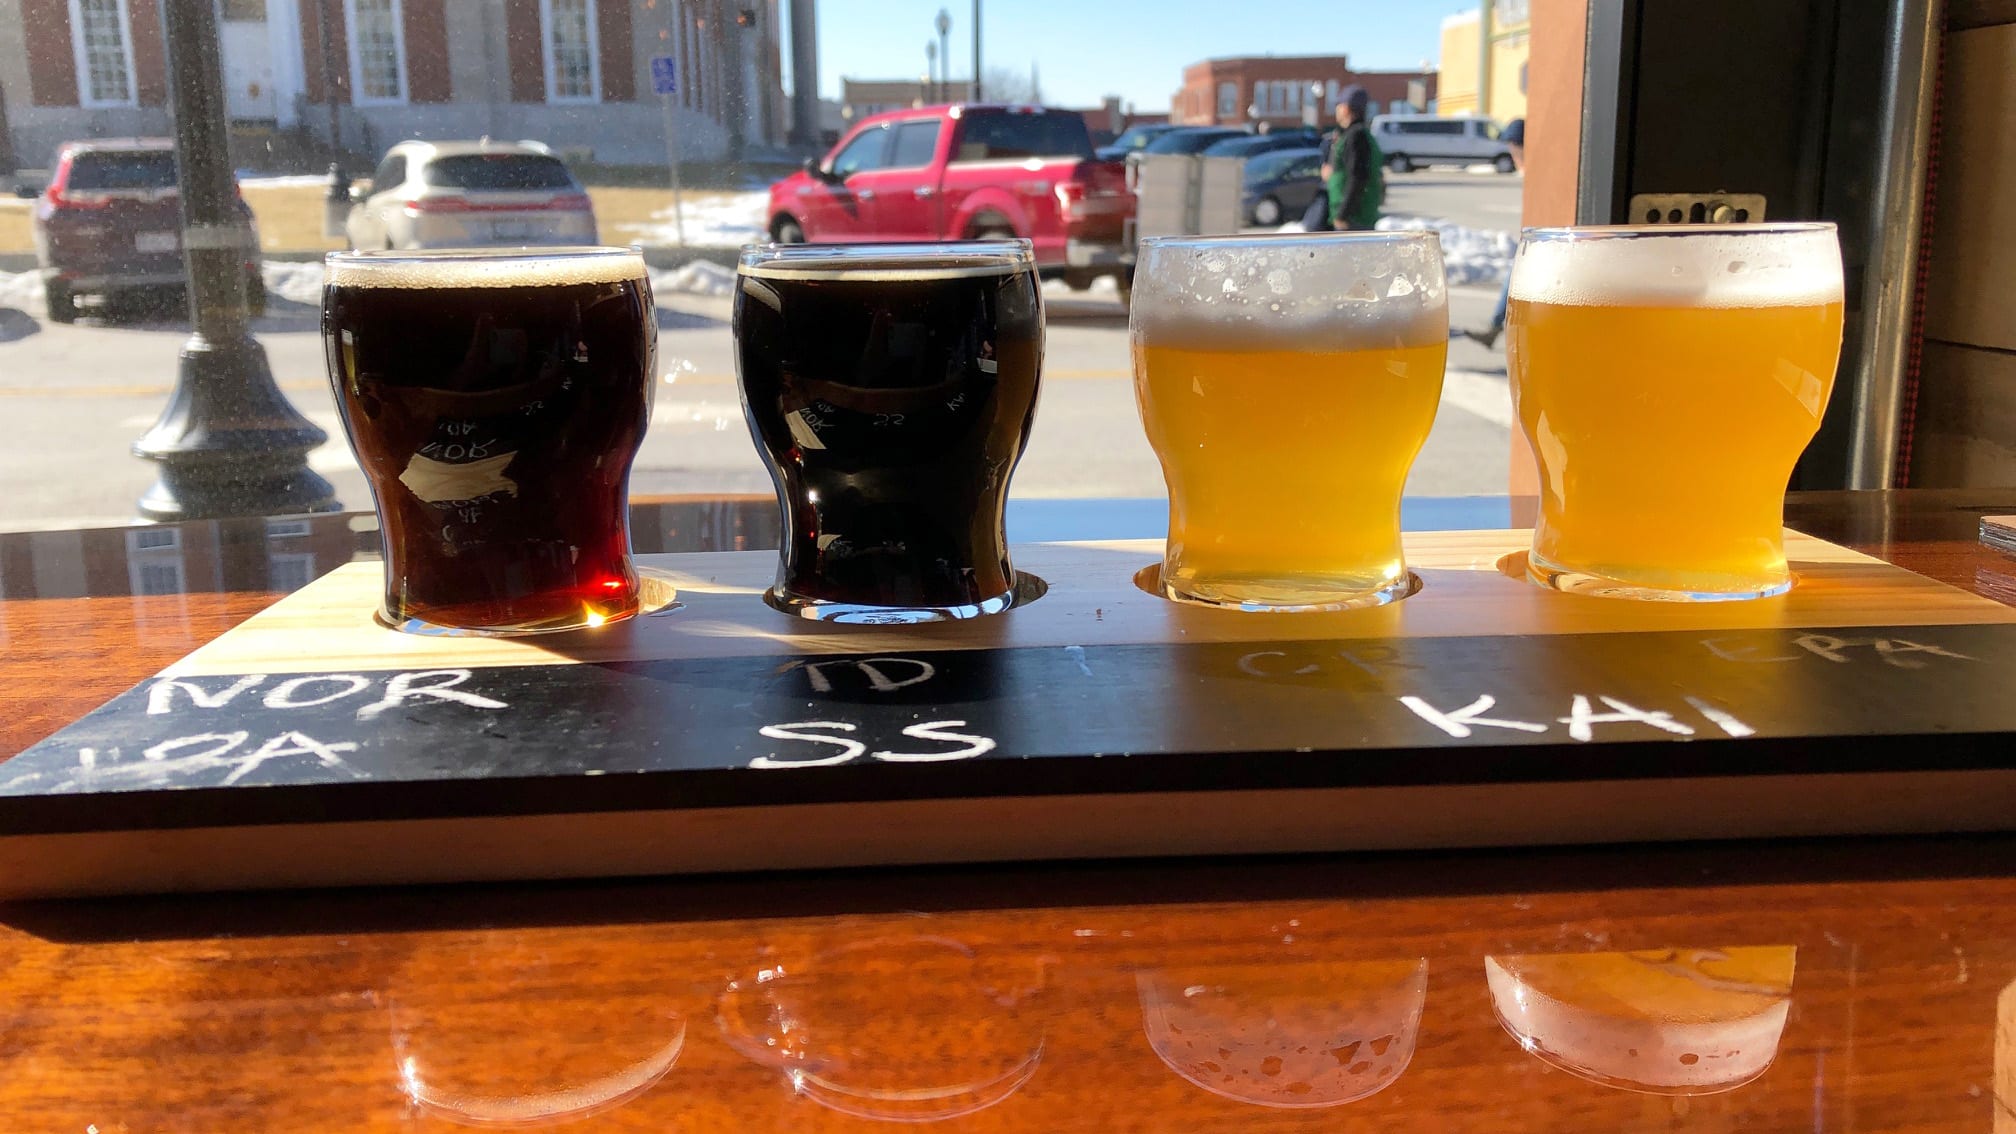 A flight of 3 Trails Brewing Co.'s